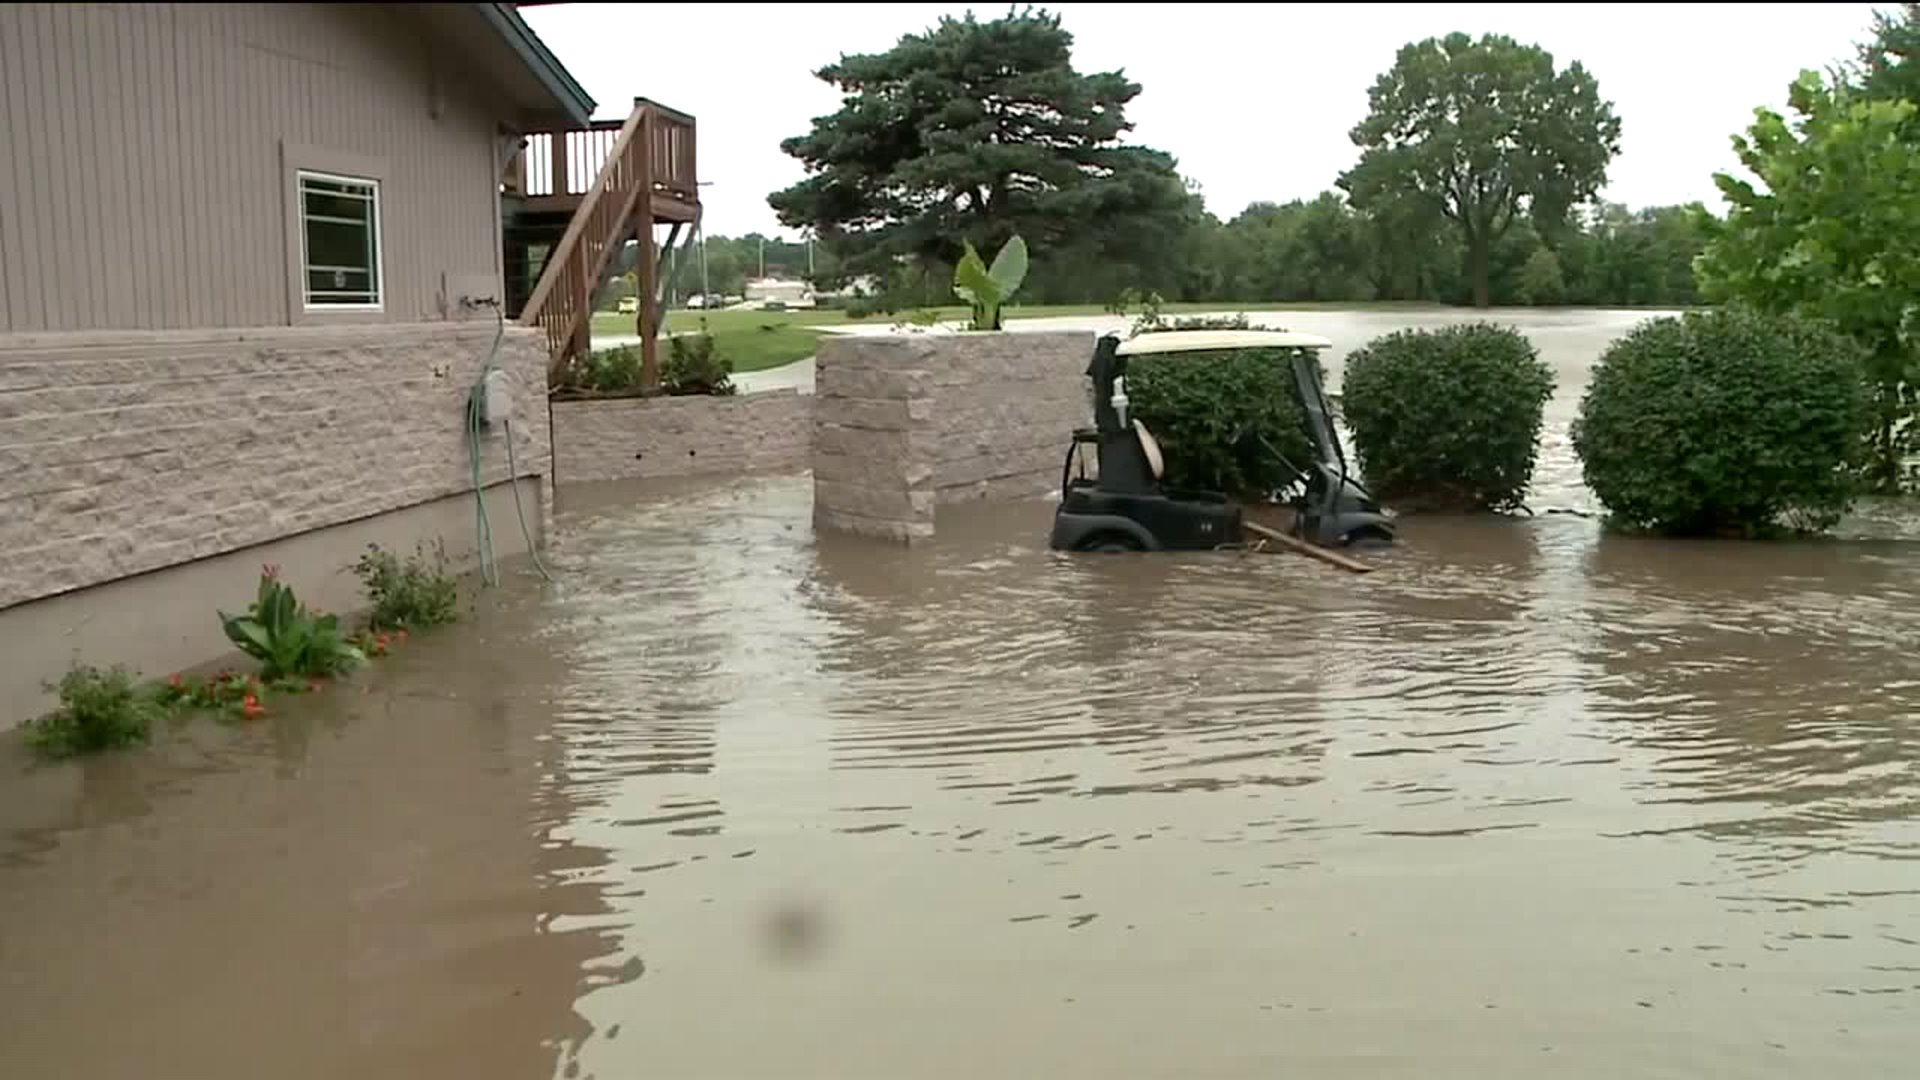 With relief in his voice, manager of OP golf course walks FOX 4 through  flooded building where he was trapped, FOX 4 Kansas City WDAF-TV